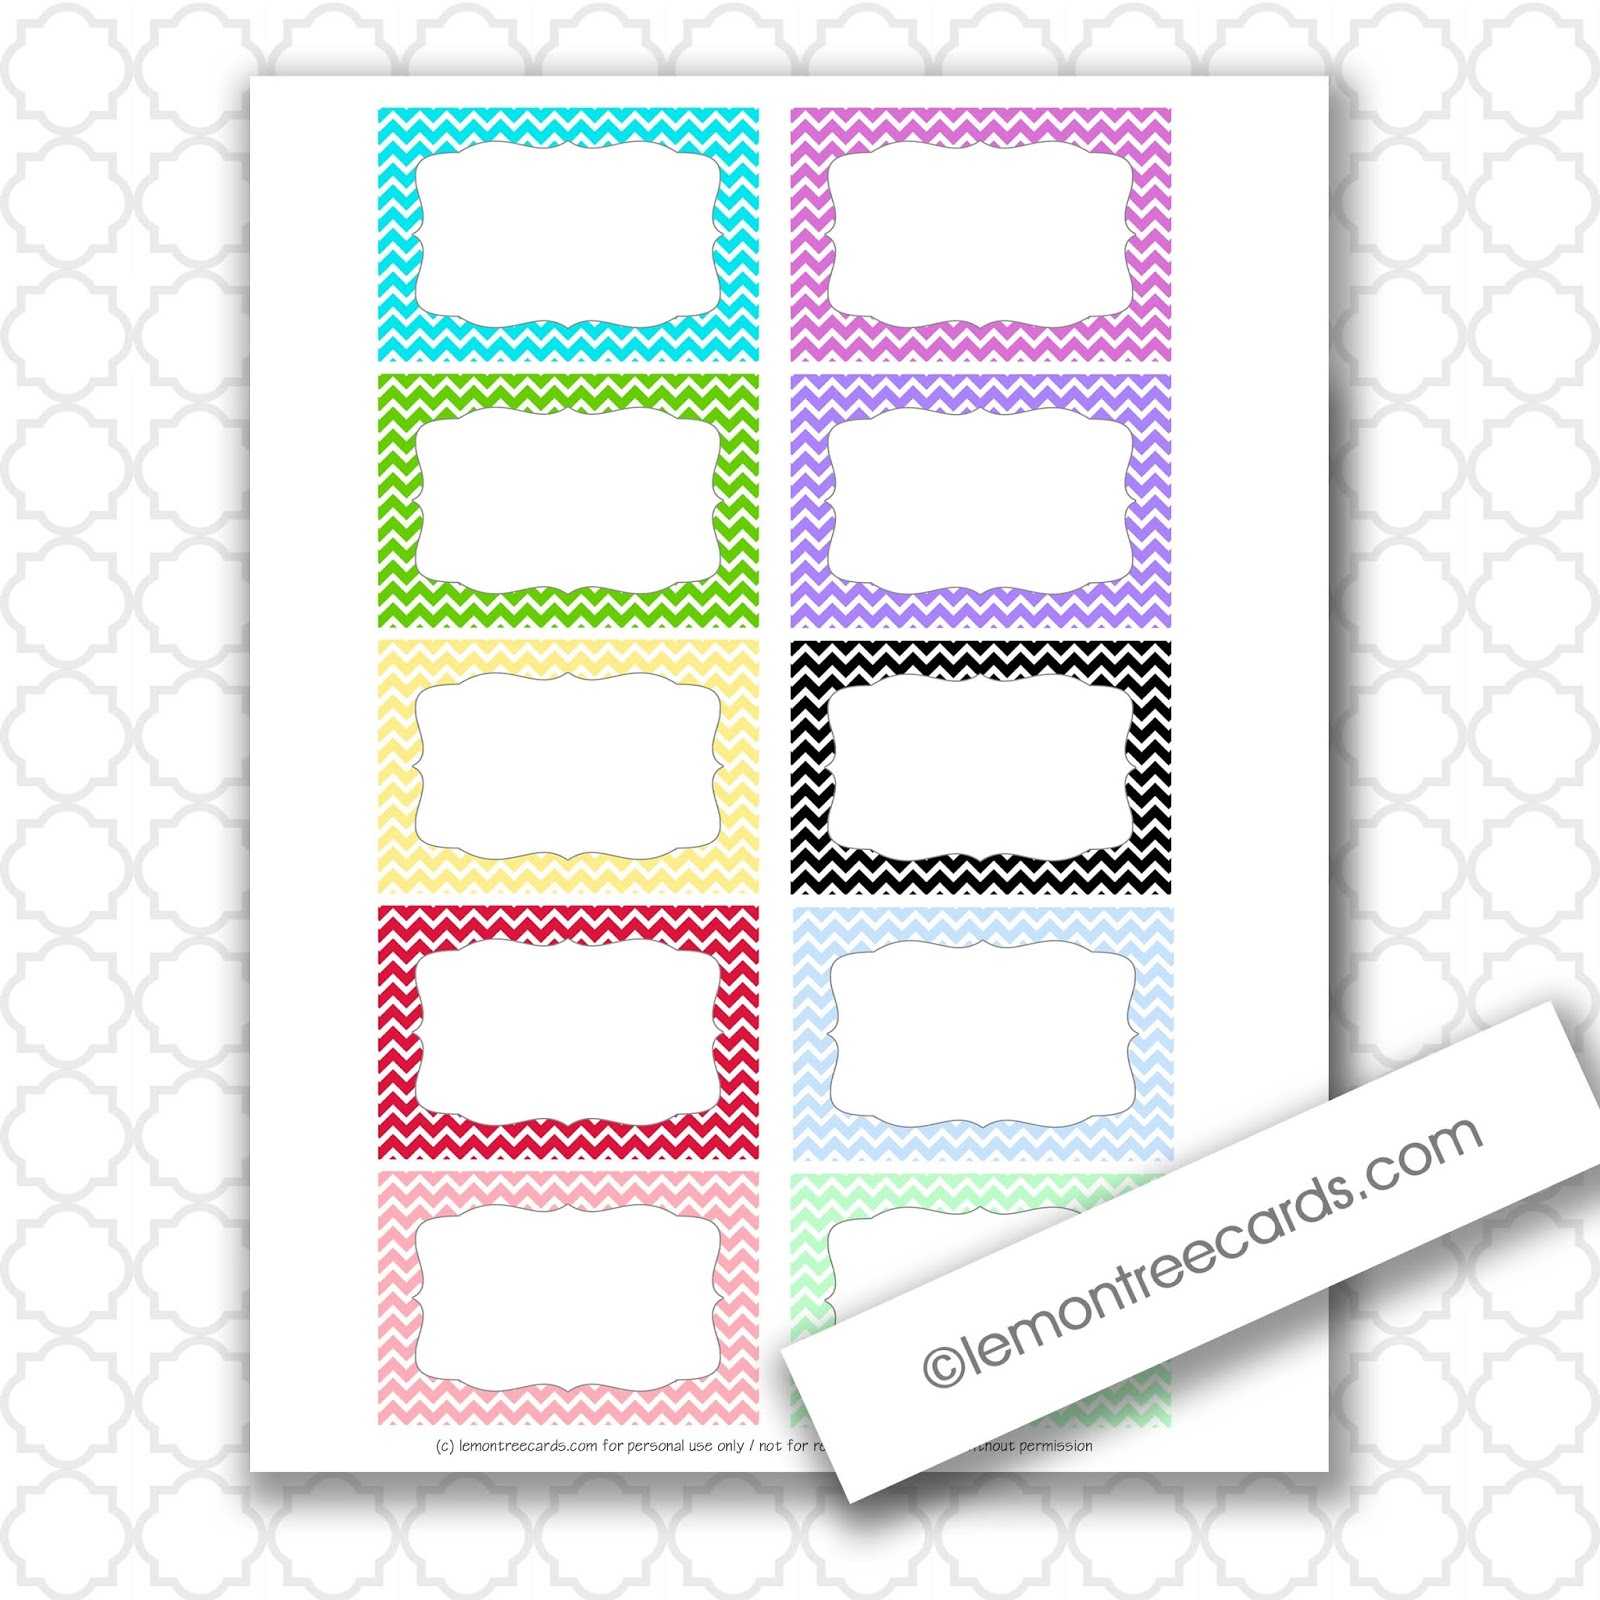 28+ [ 5X7 Index Card Template ] | 5X7 Index Card Template Regarding 3X5 Blank Index Card Template